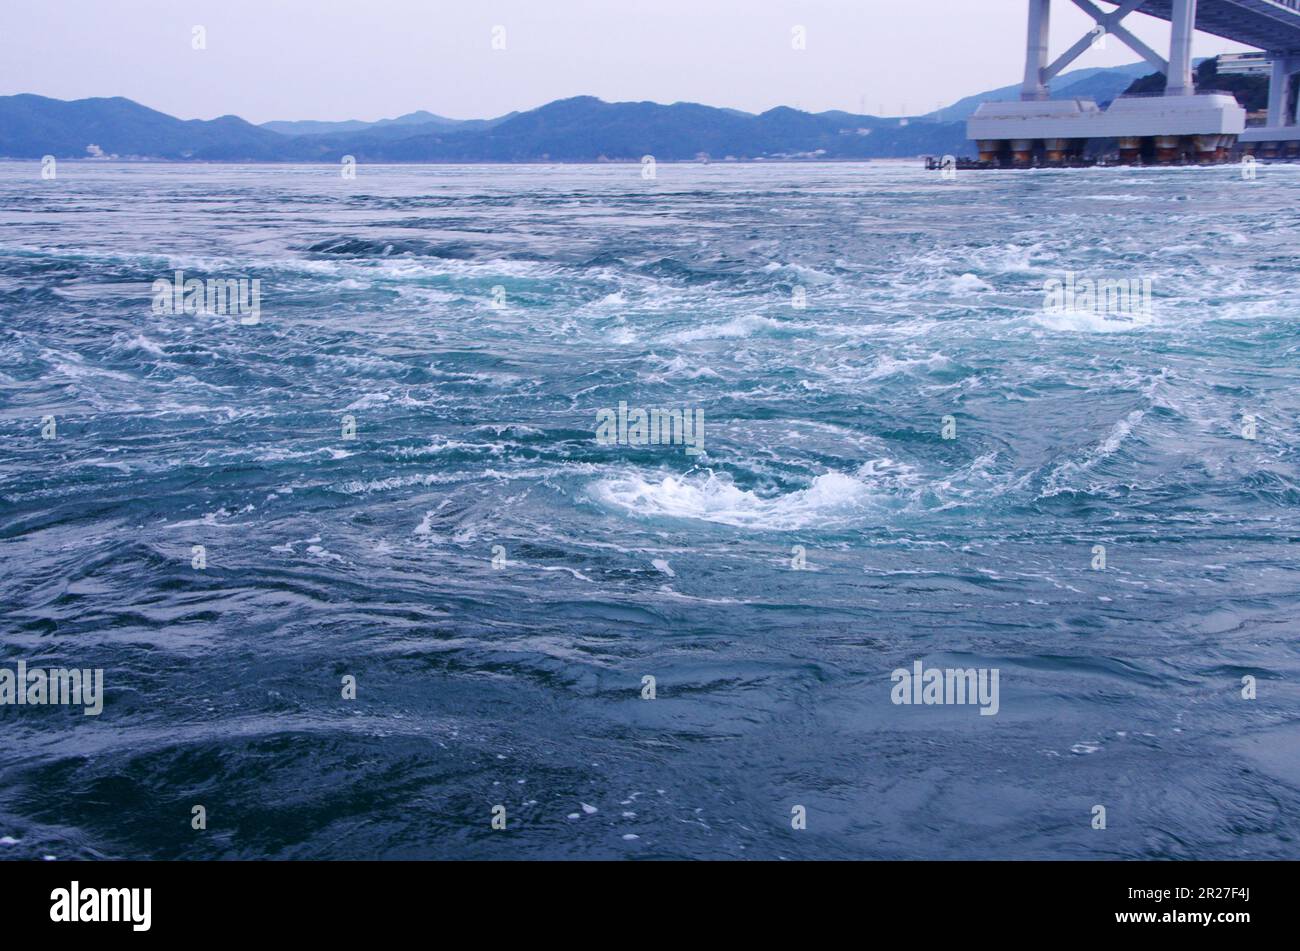 Whirlpools in the Naruto Strait Stock Photo